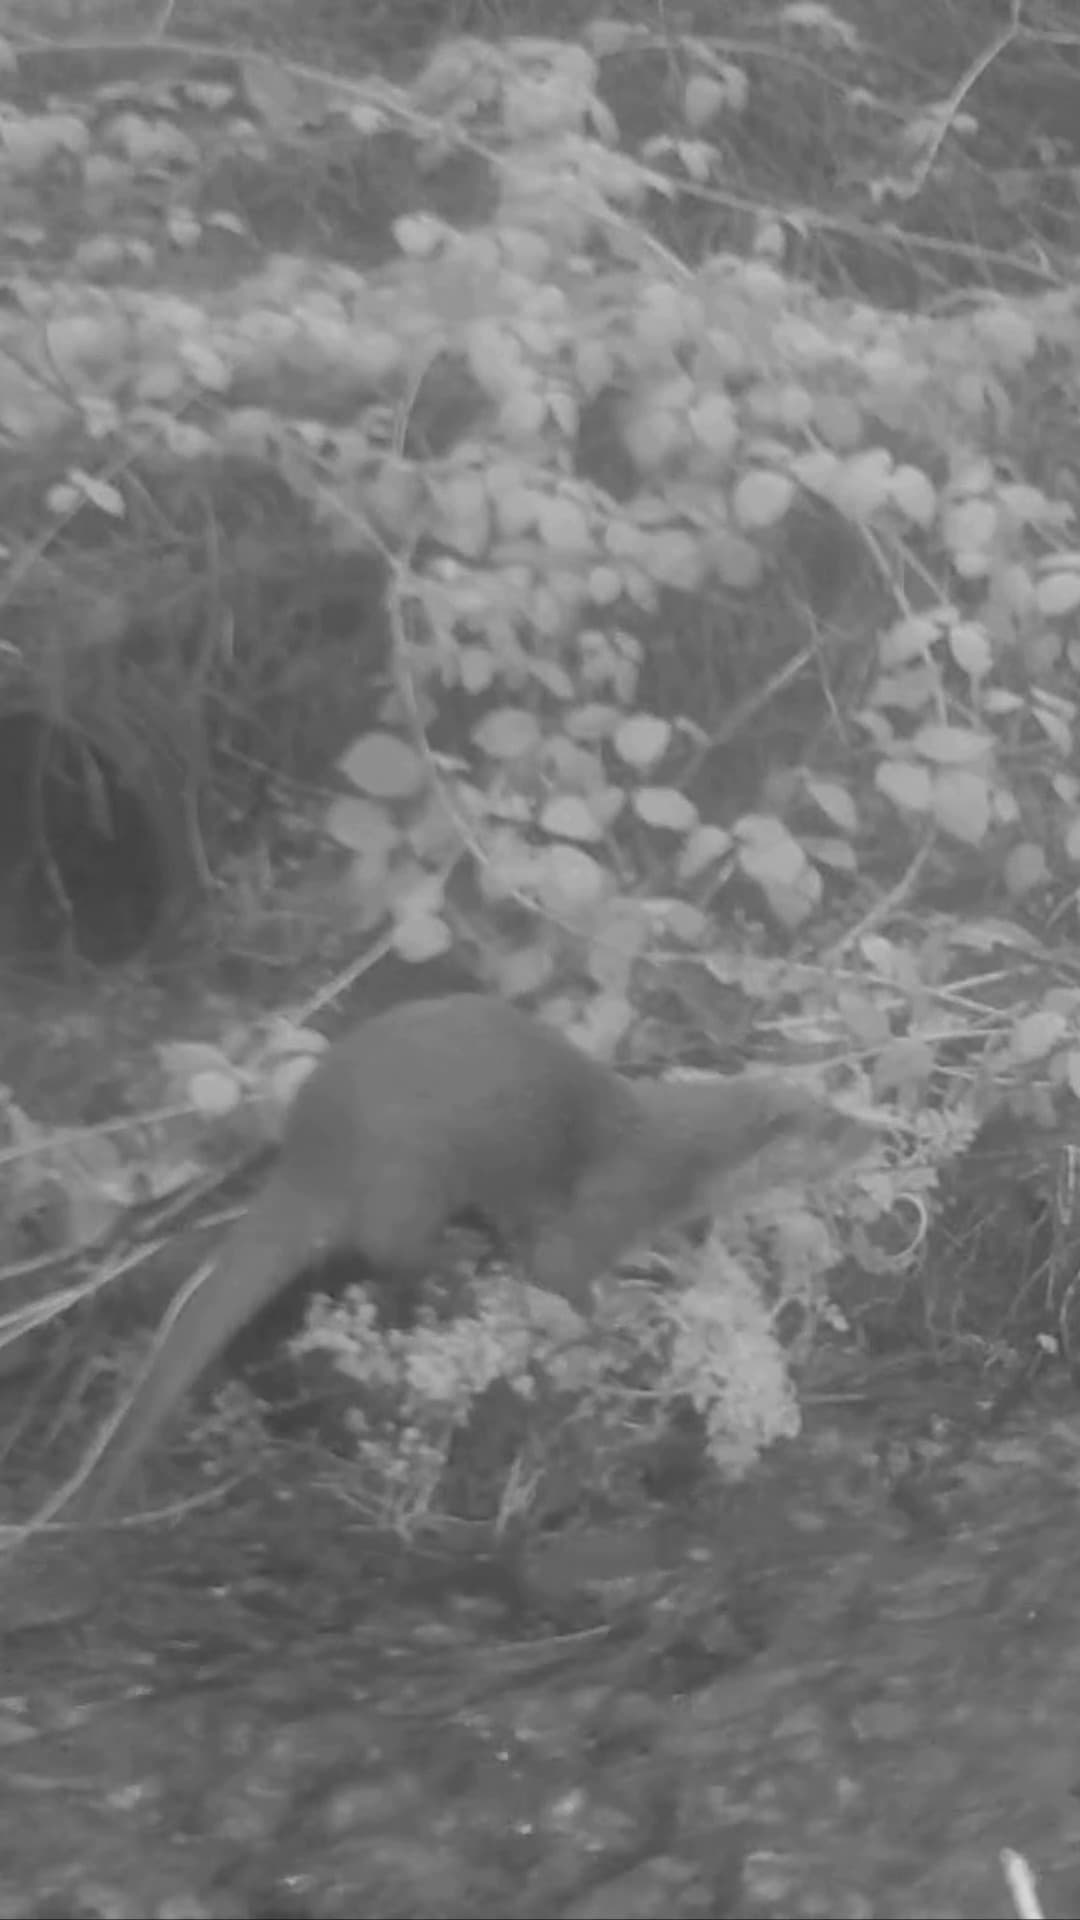 Check out this otter spotted on our critter cam! 🦦🤭

Back in 2019, we teamed up with Pembrokeshire Coast National Park Rangers to create a cosy otter haven at our resort. 

Thanks to our monthly surveys and trusty critter cams, we now know that otters are regular Bluestone visitors! 🪵✨